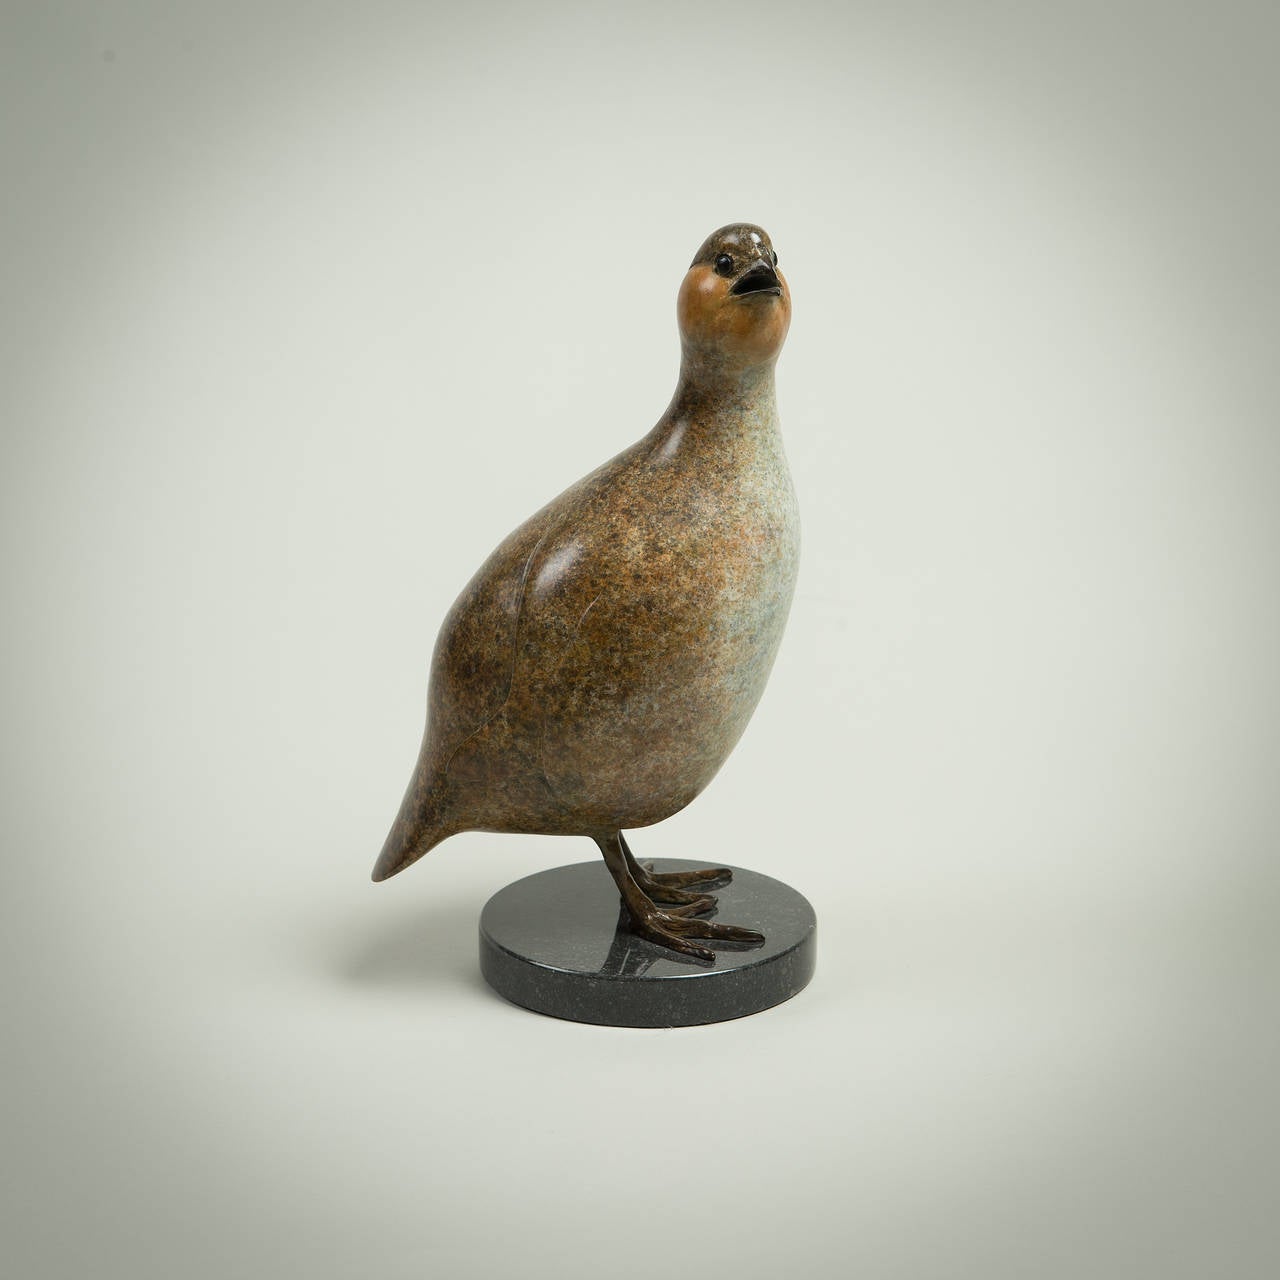 Contemporary Bronze Wildlife Sculpture 'Standing Partridge' by Richard Smith For Sale 3